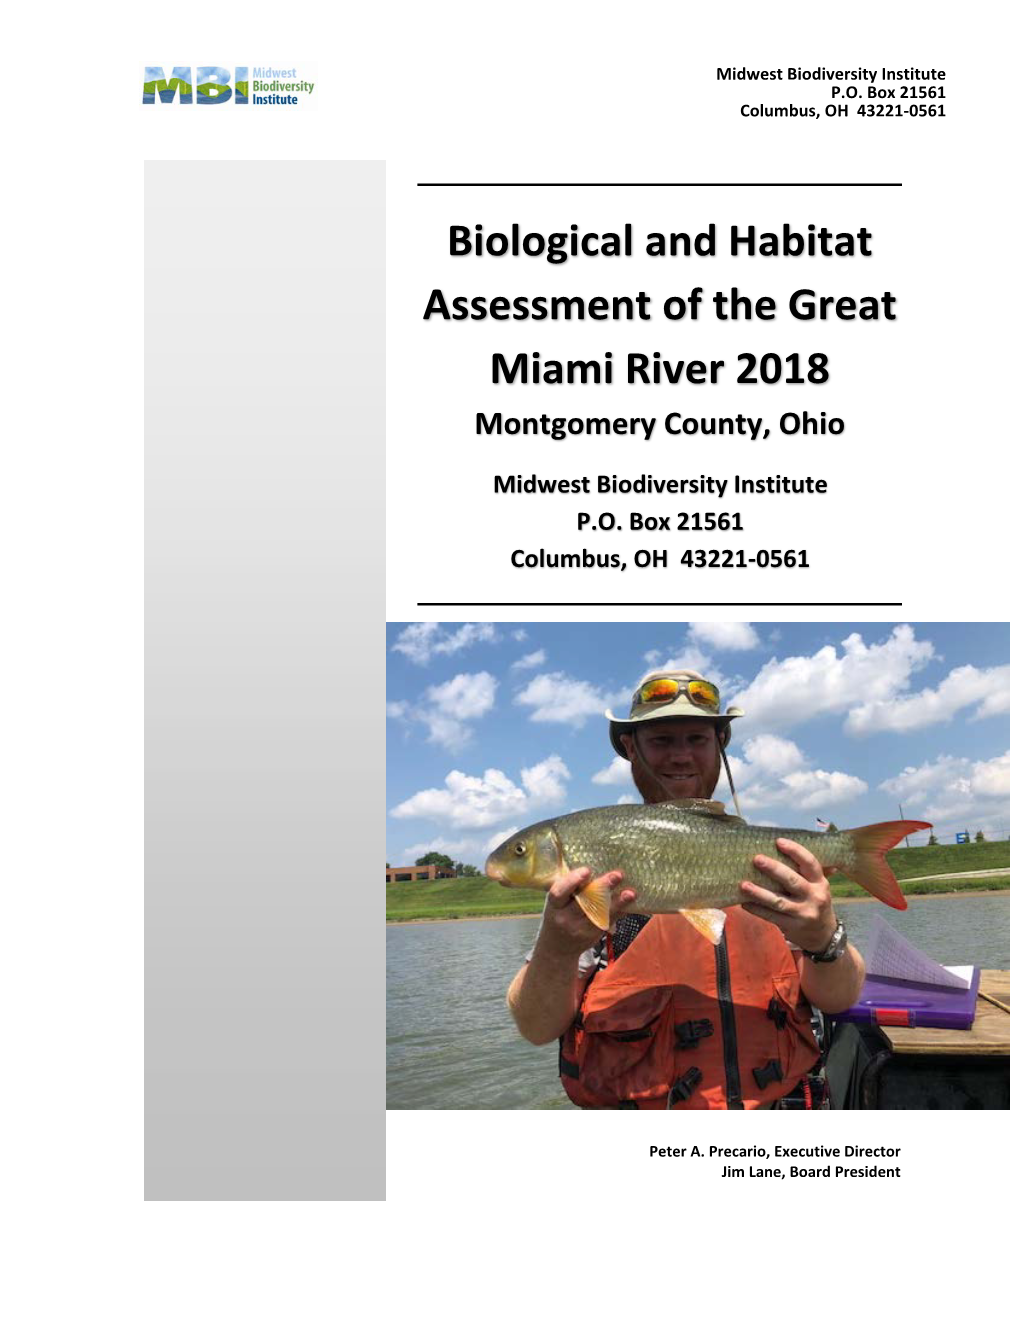 Biological and Habitat Assessment of the Great Miami River 2018 Montgomery County, Ohio